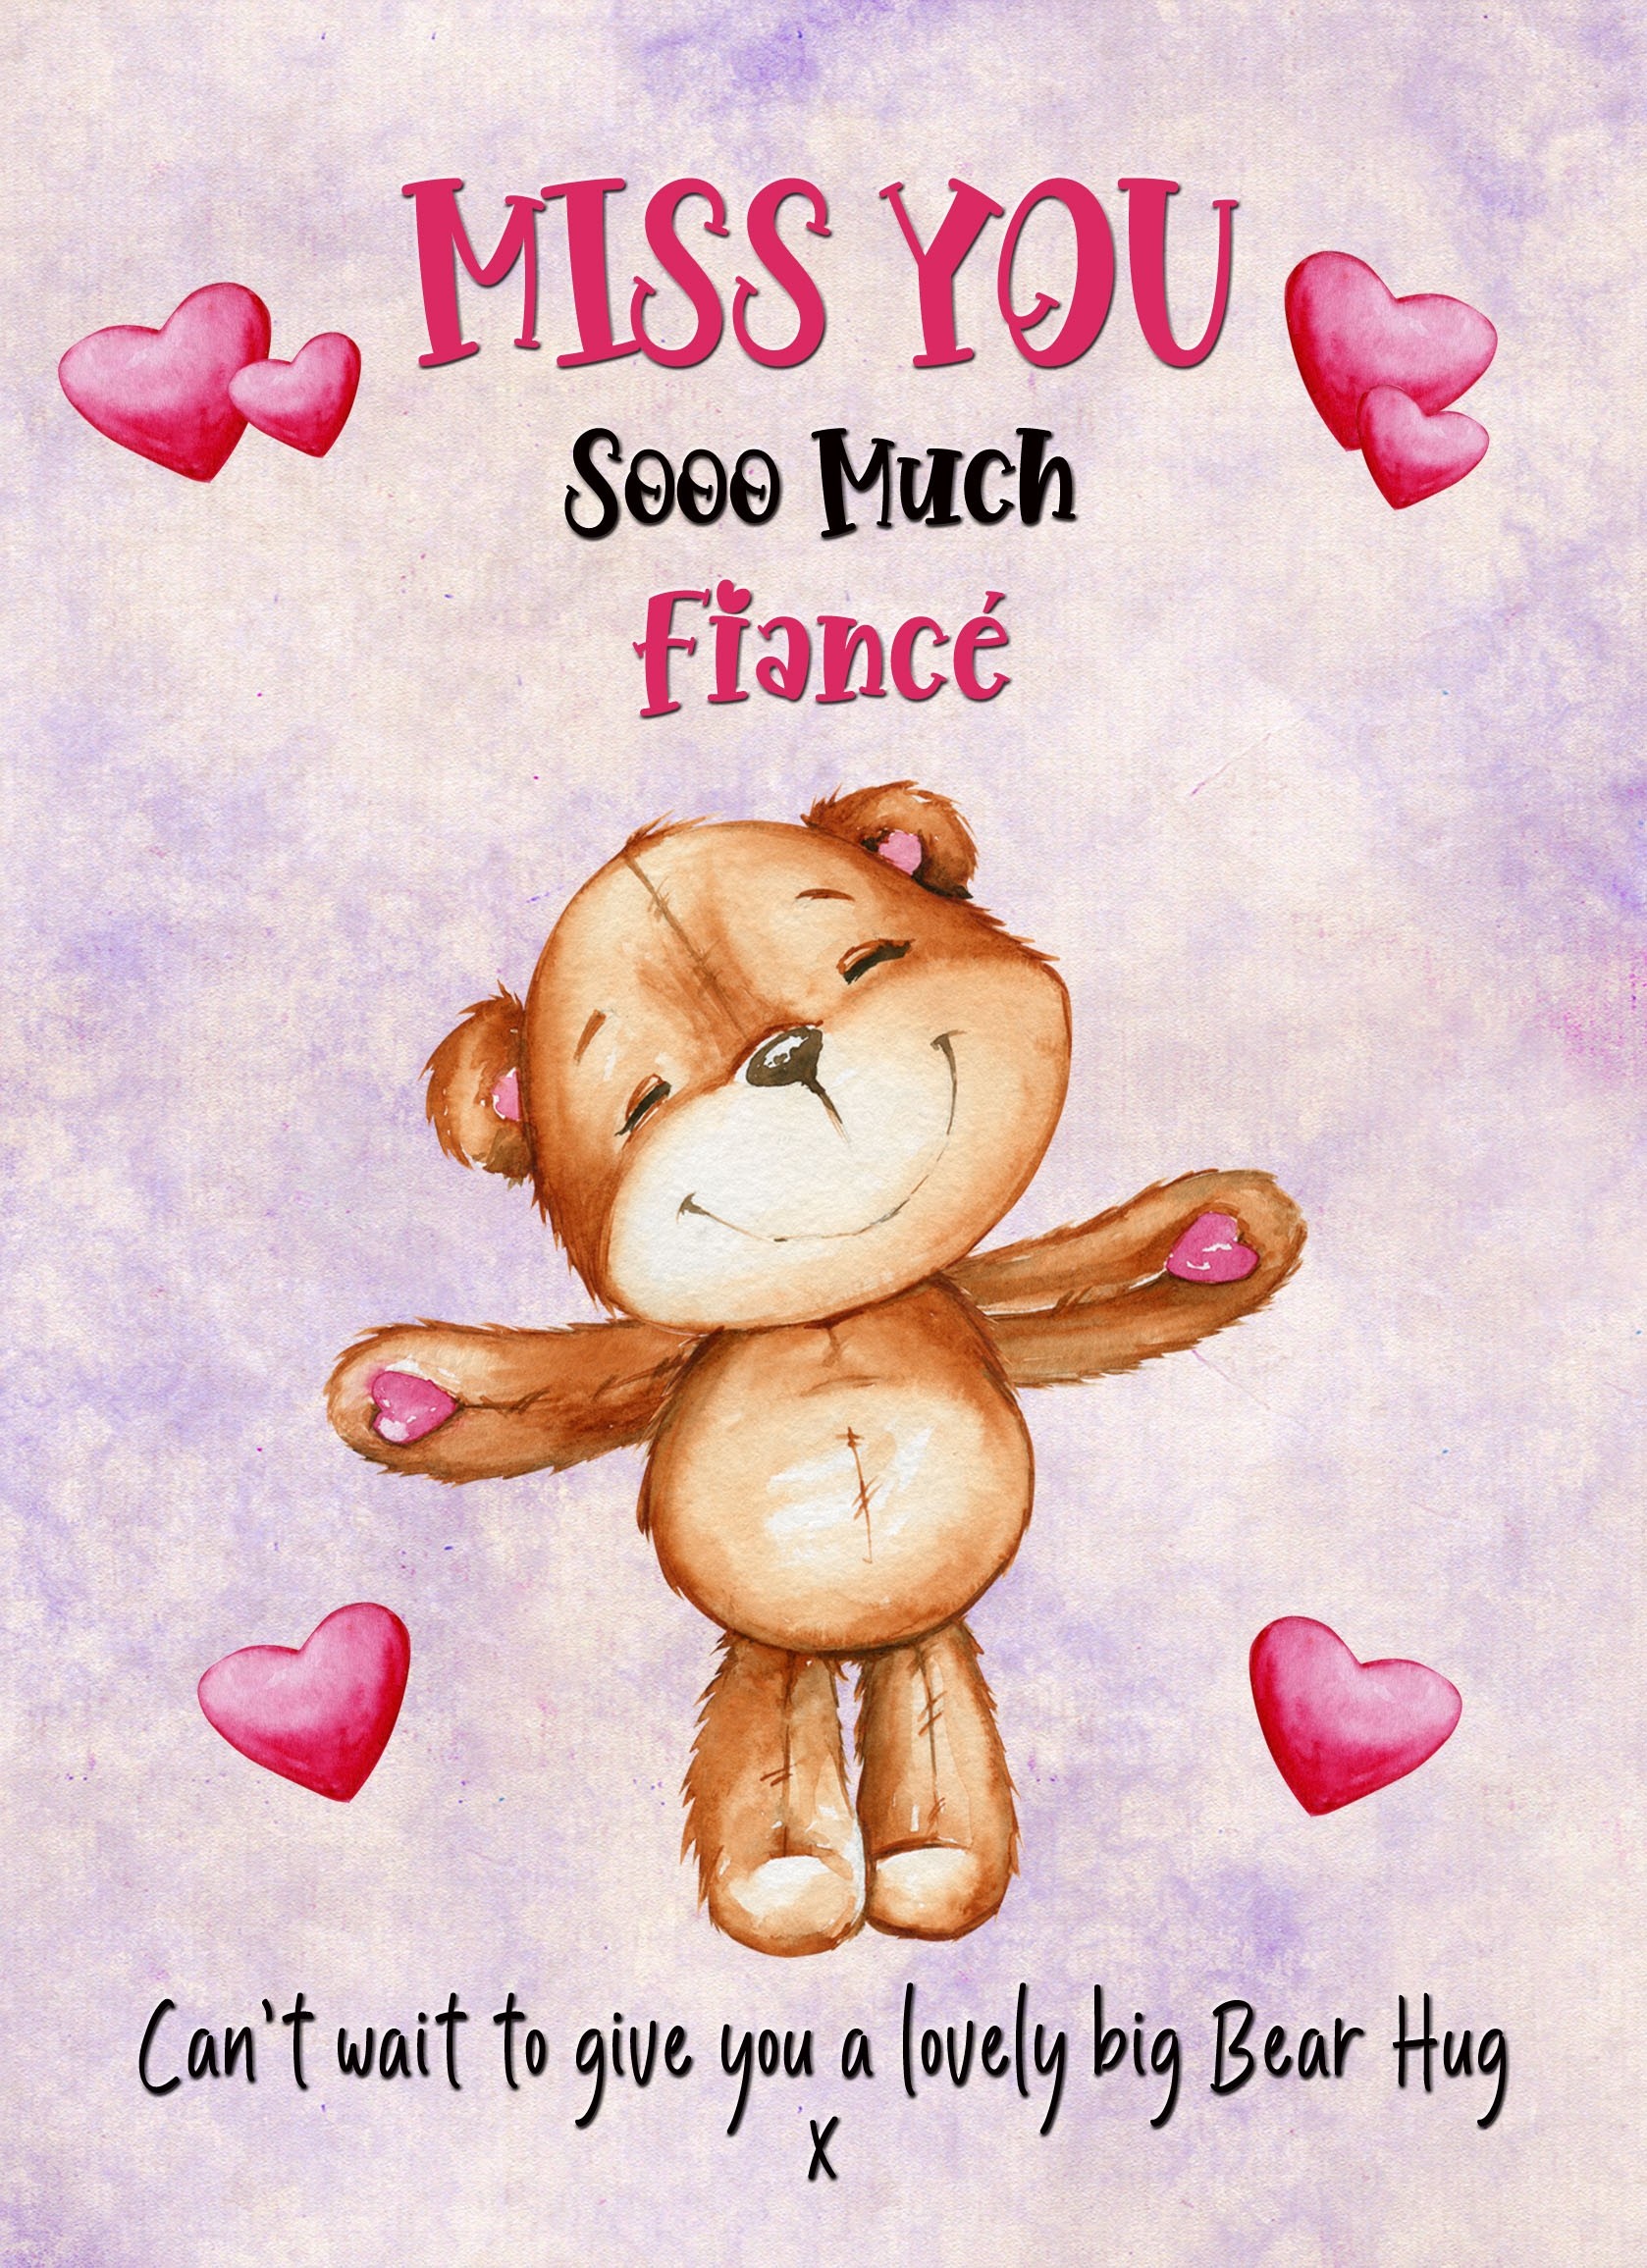 Missing You Card For Fiance (Hearts)